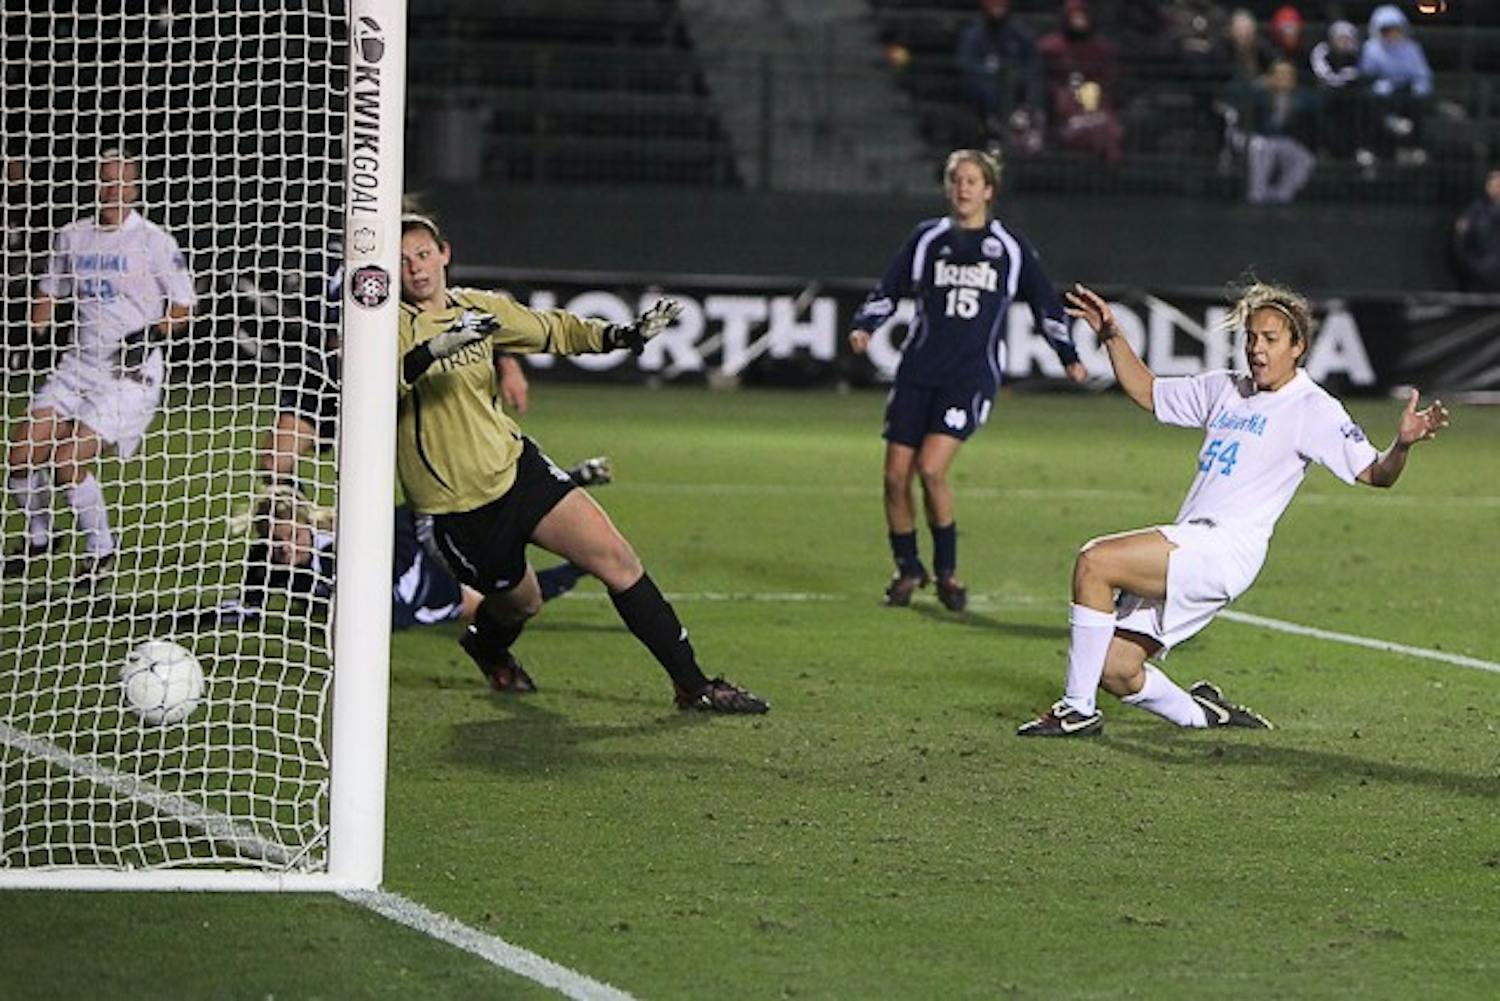 Casey Nogueira scored the lone goal to lift the Tar Heels over the Fighting Irish in the College Cup Semifinals DTH/Phong Dinh